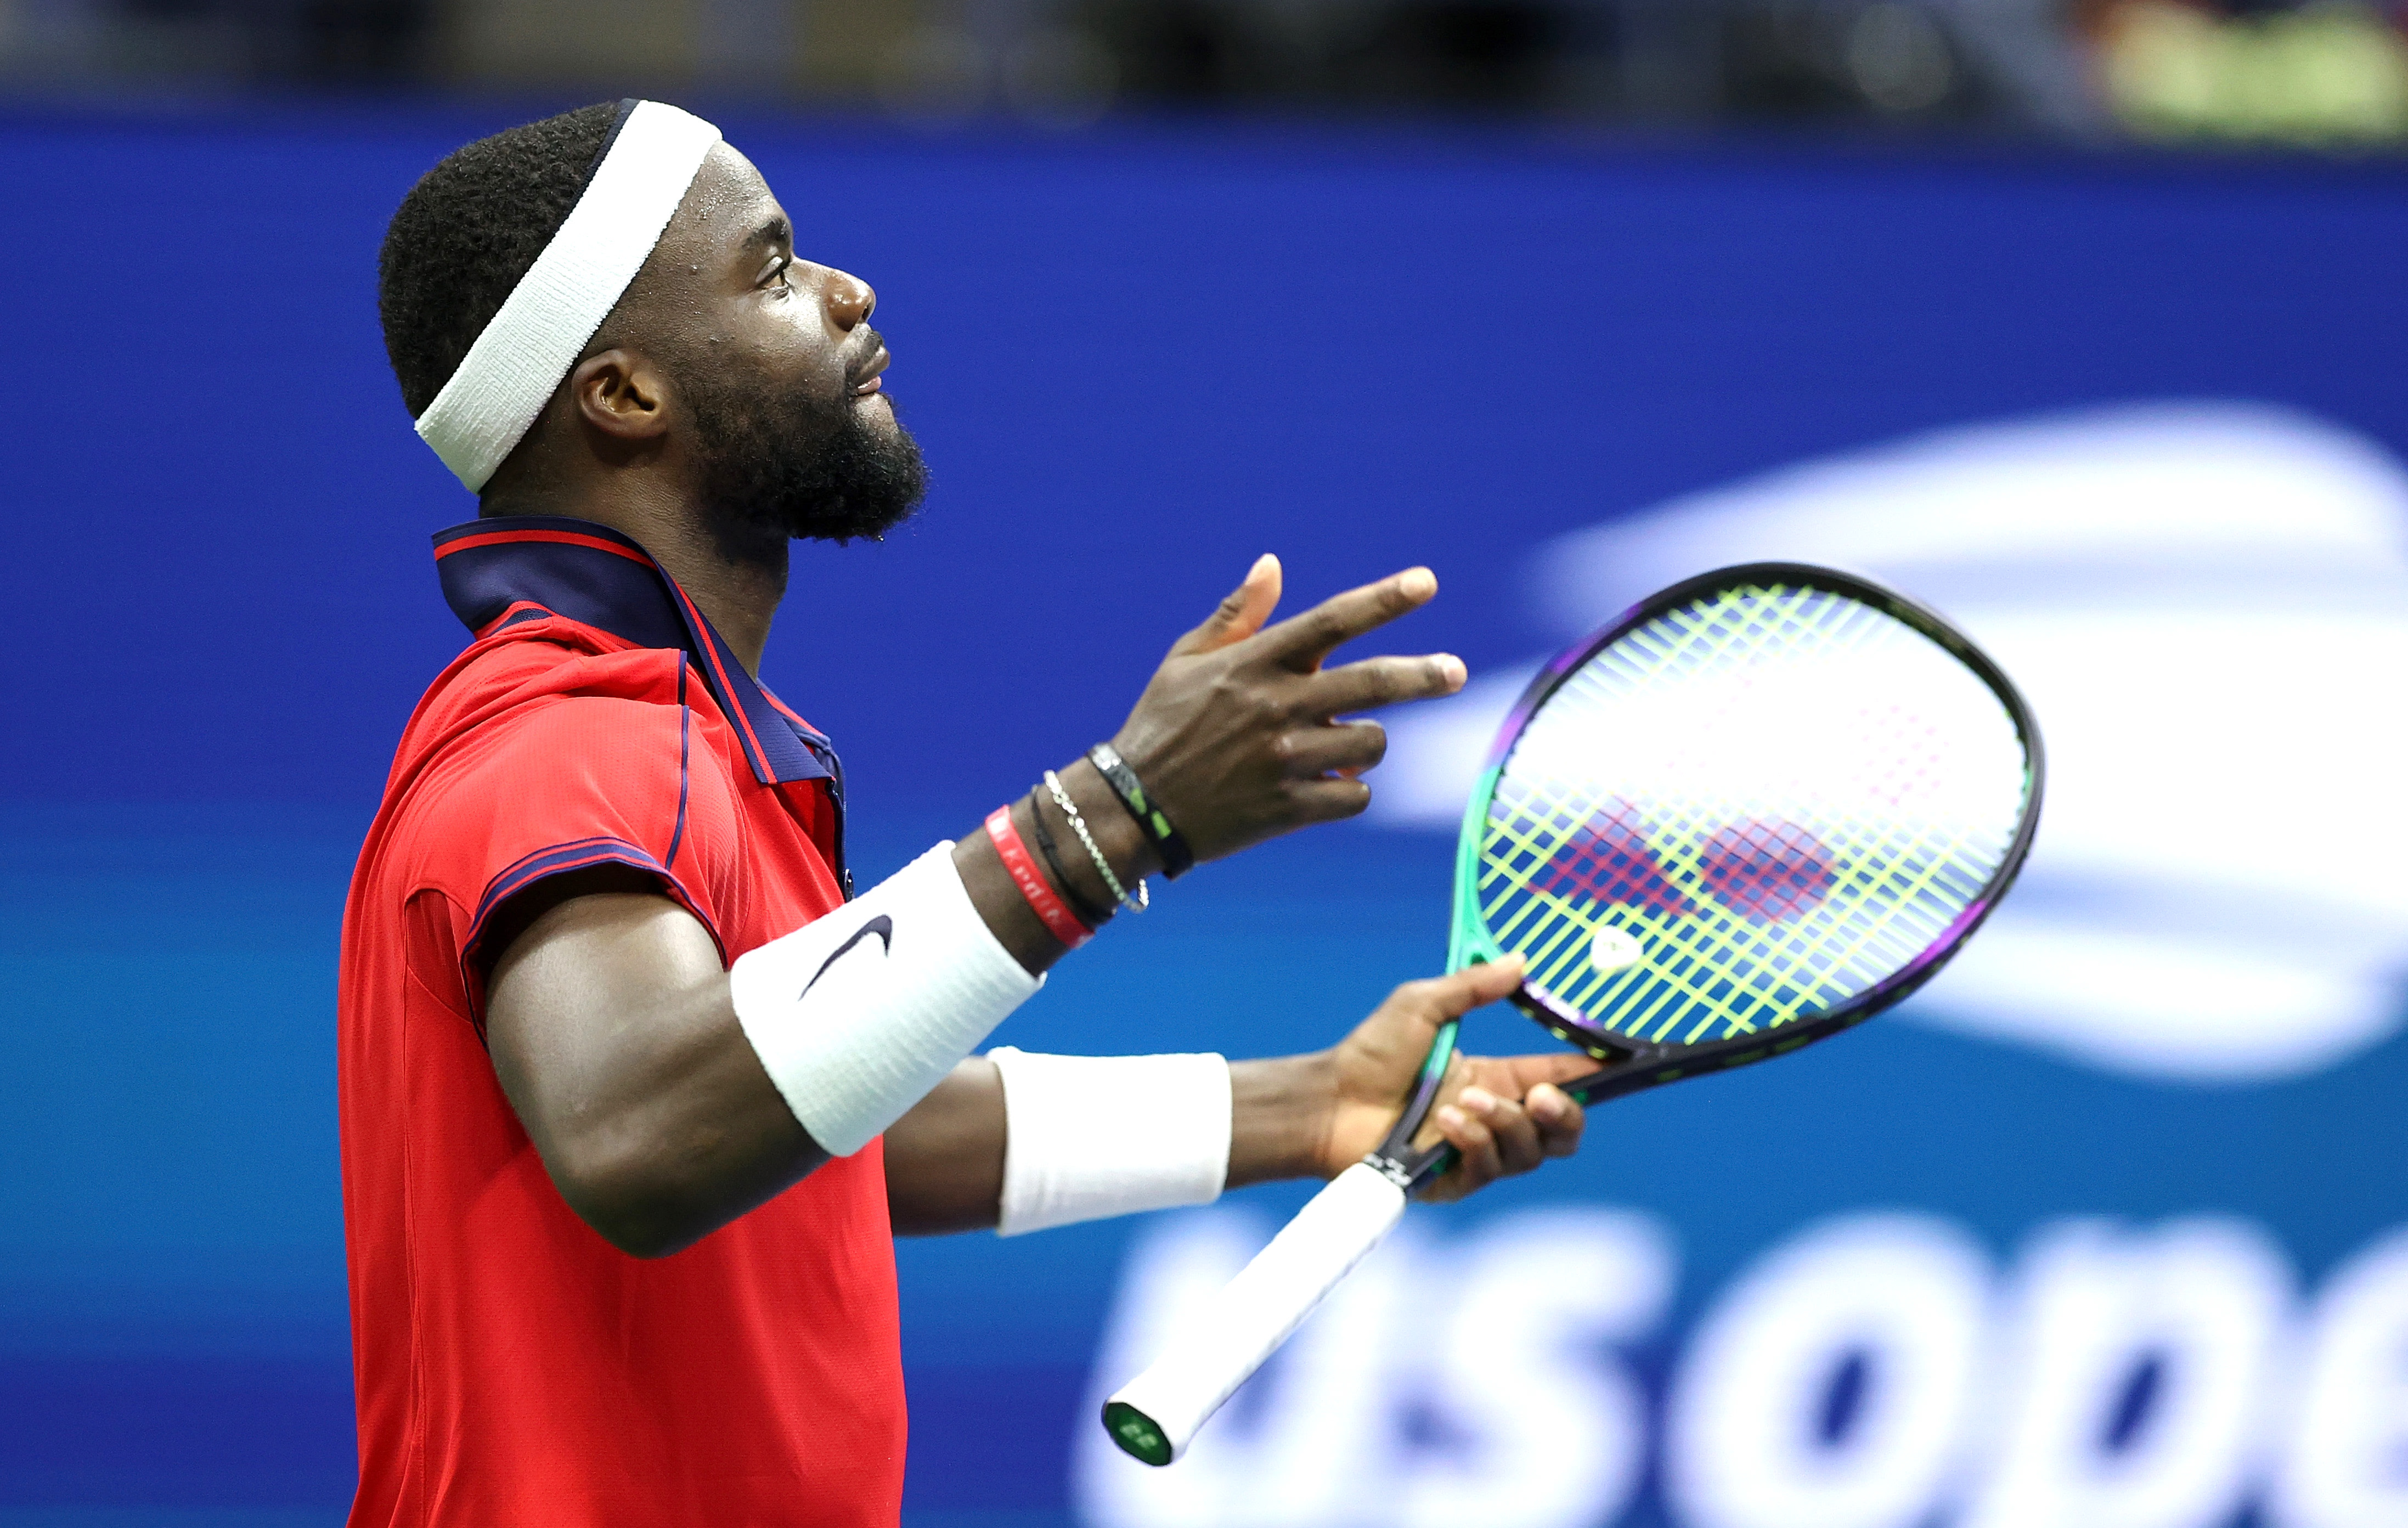 Stat of the Day Tiafoe outlasts Rublev in fifth-latest finish in US Open history